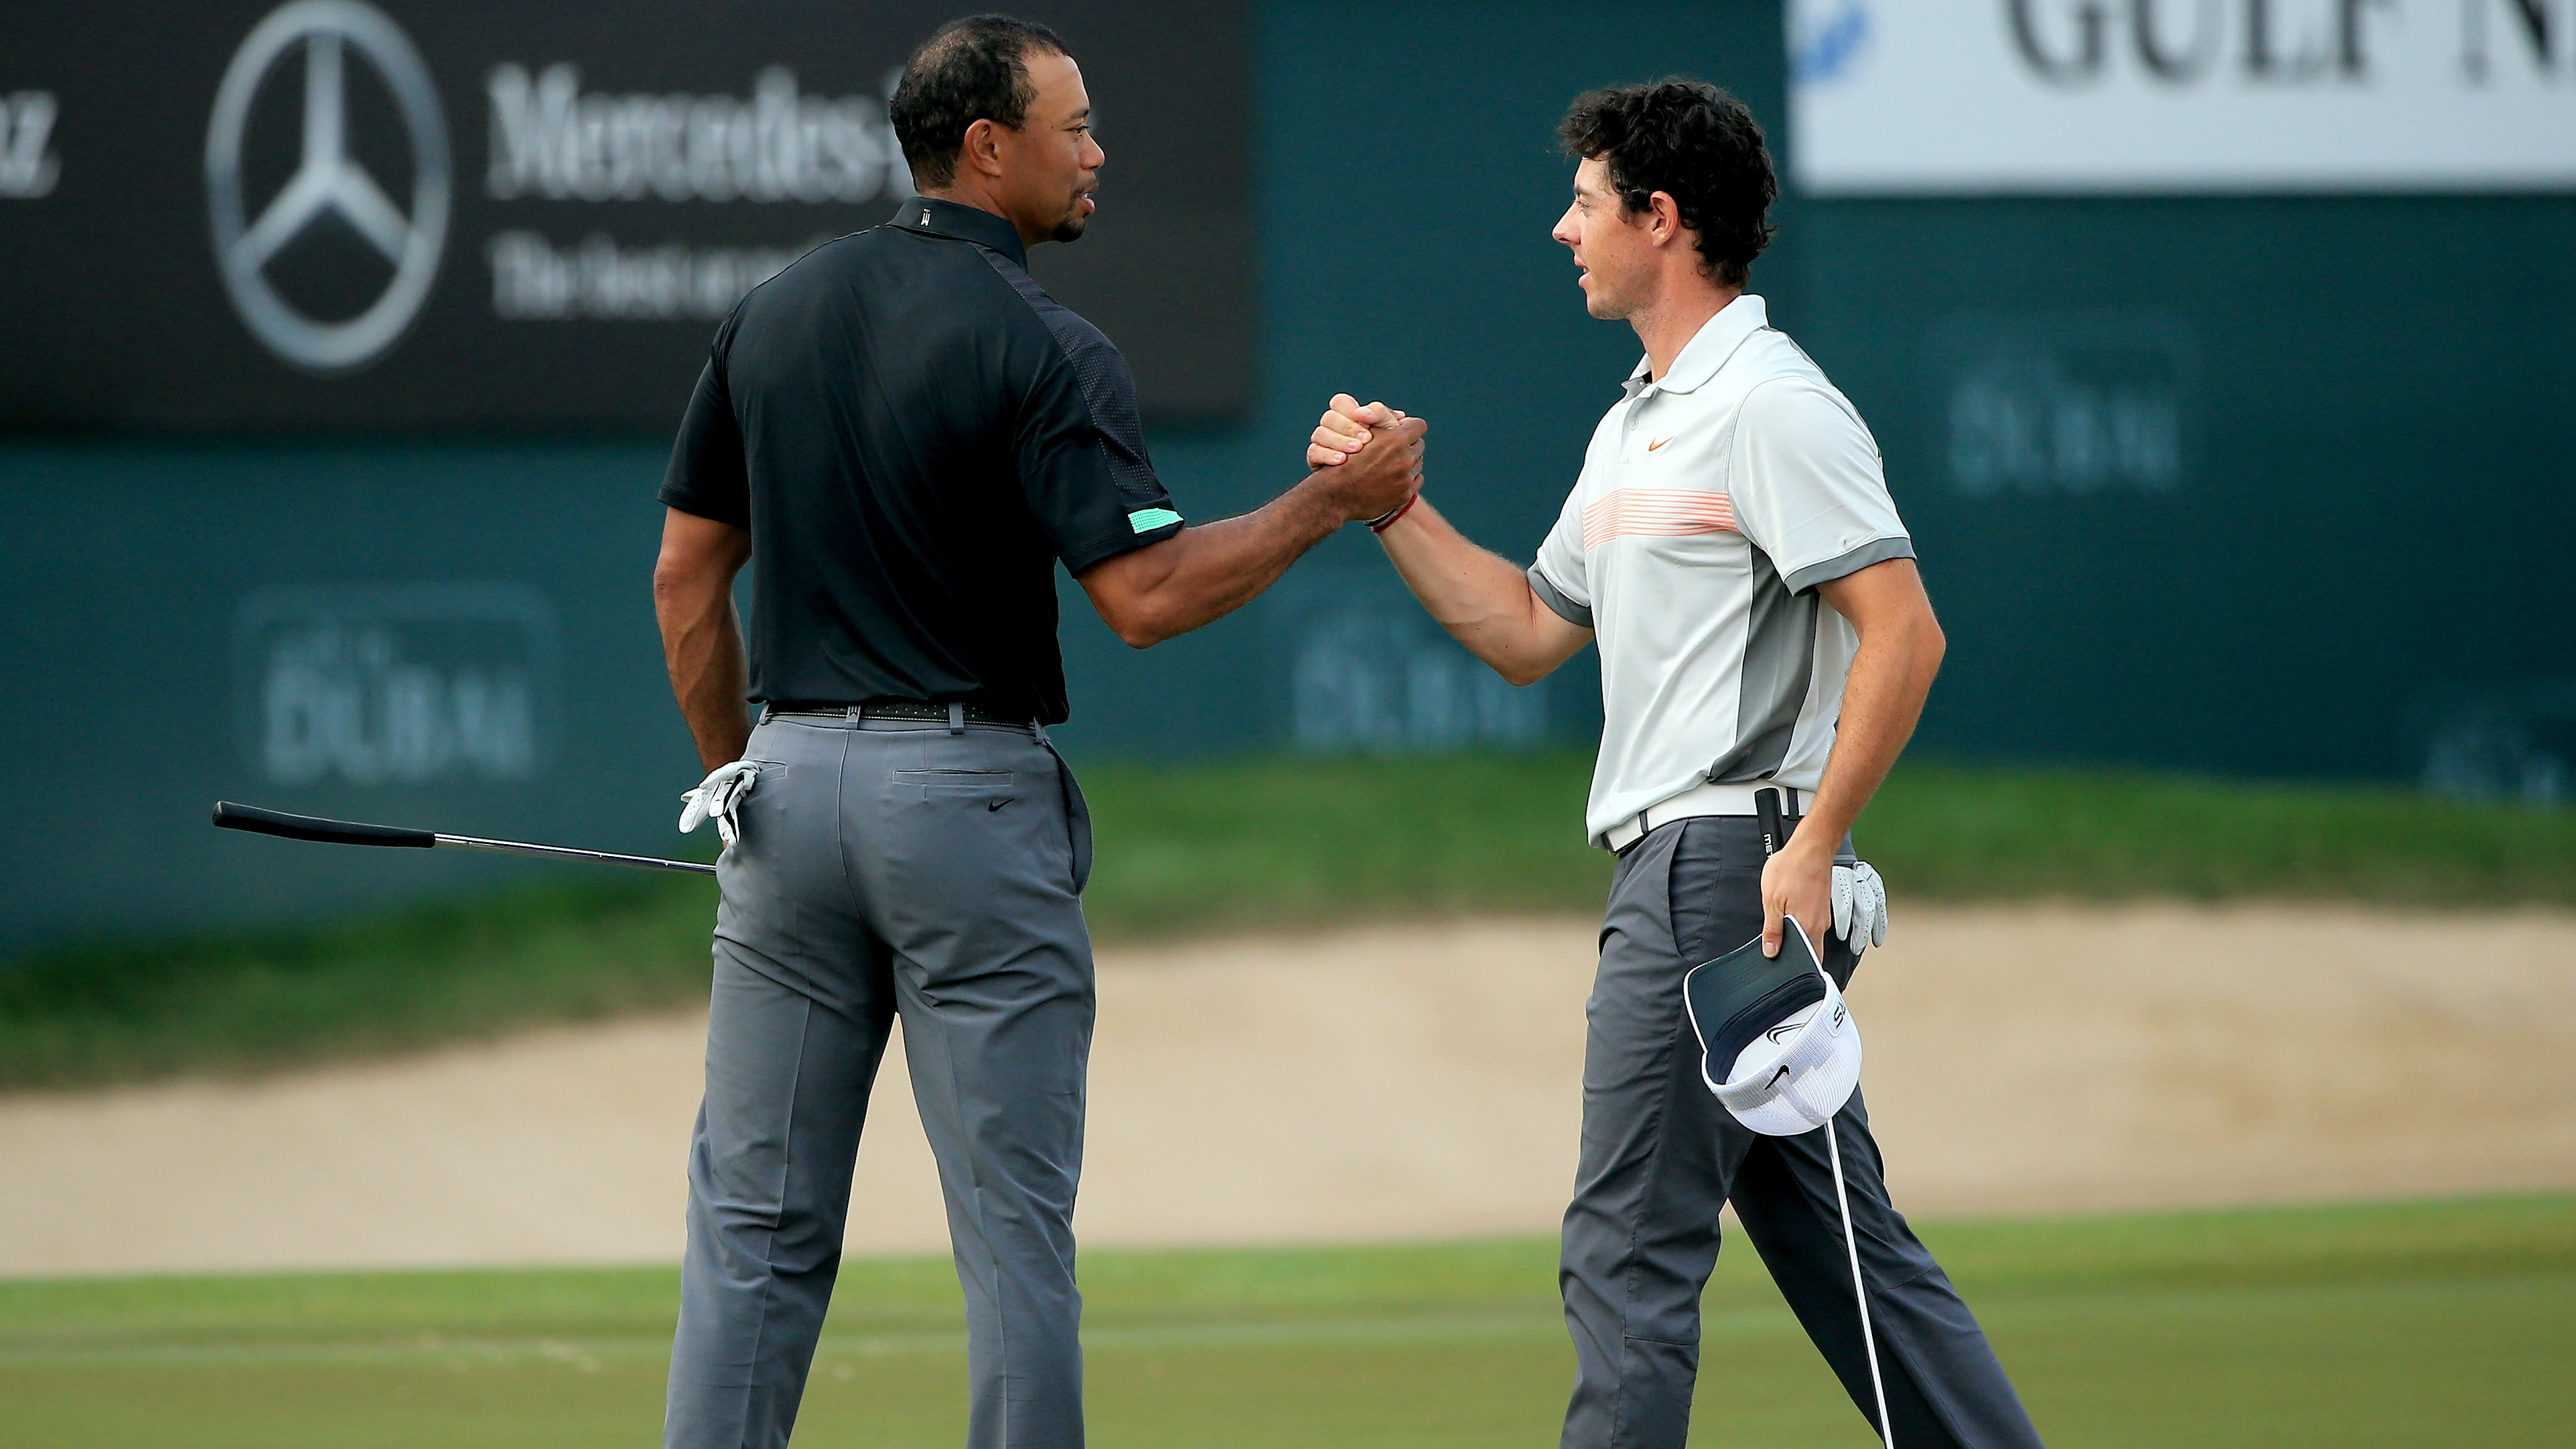 Watch: Tiger Woods, Rory McIlroy Nike 